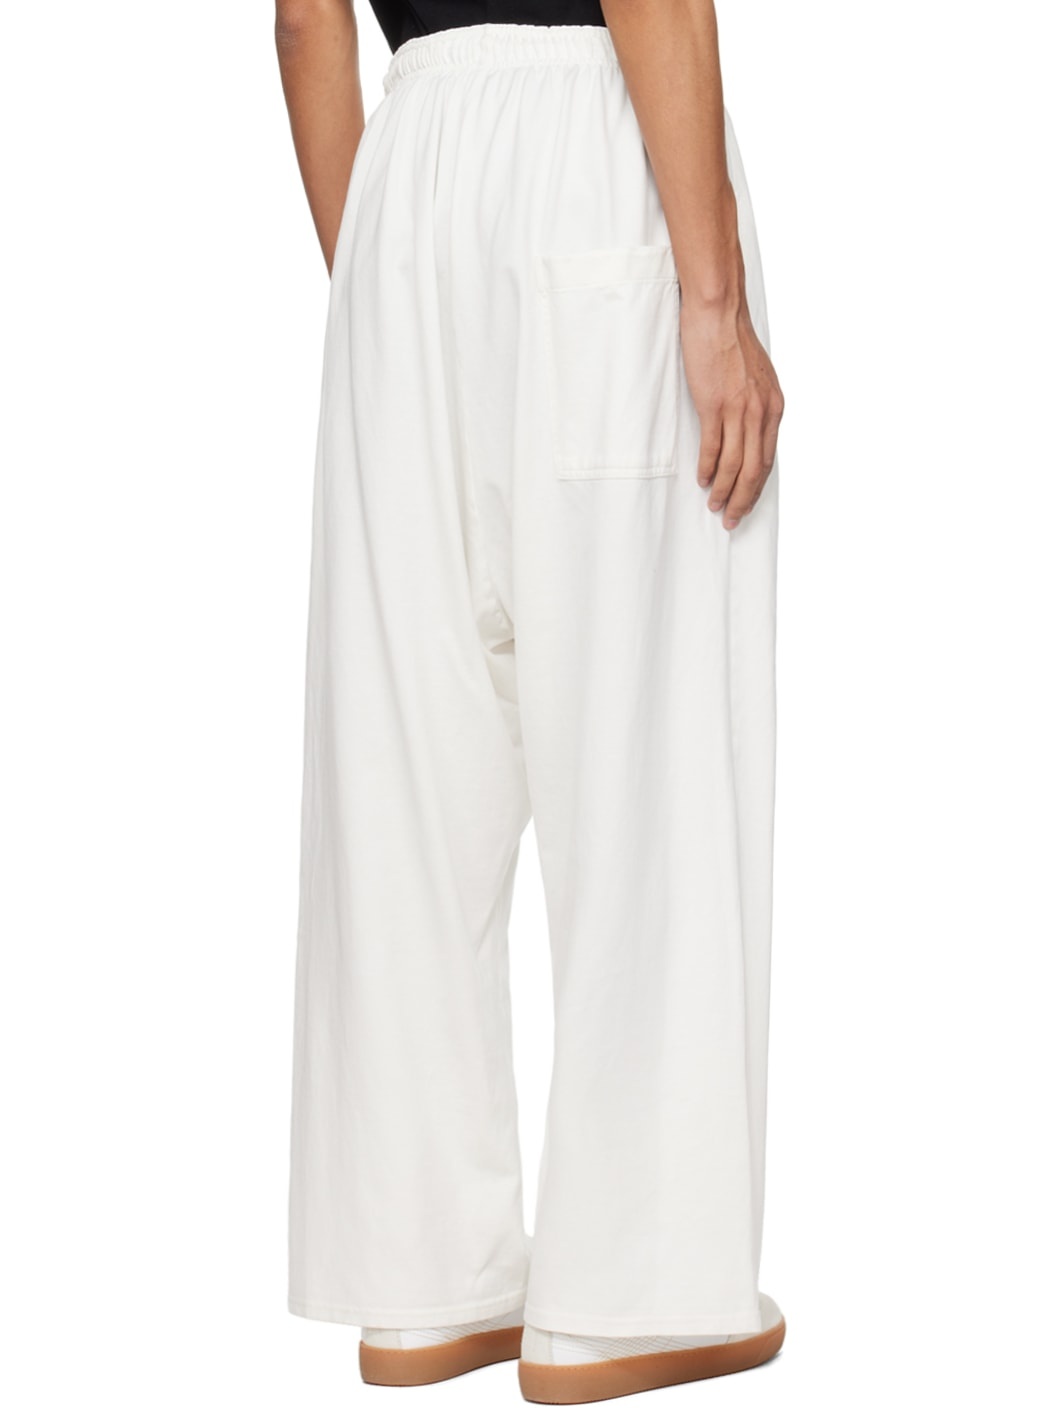 White Embroidered Sweatpants - 3